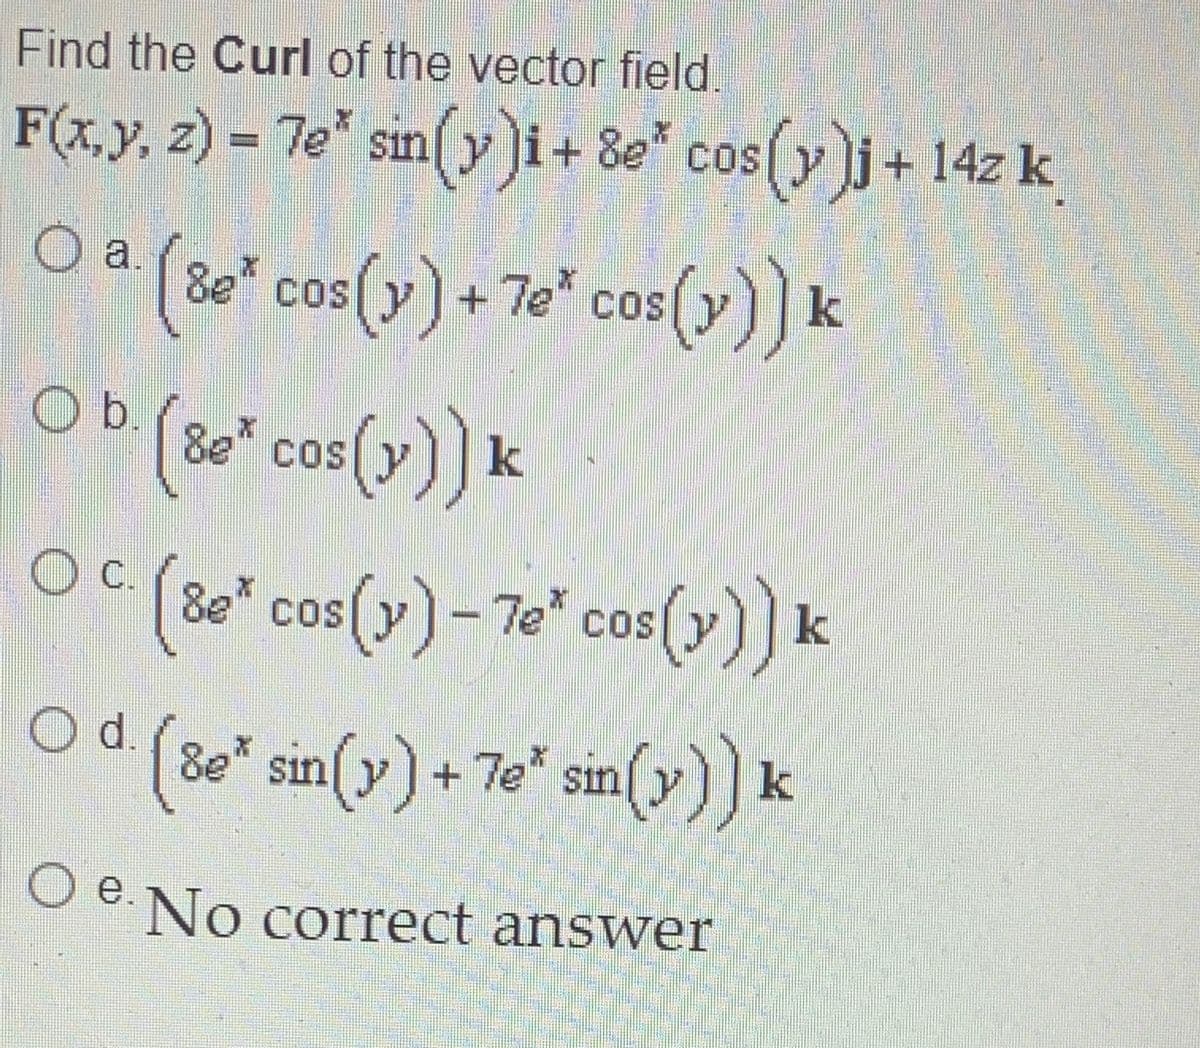 Find the Curl of the vector field.
F(x,y, z) = 7e" sin(yi+ 8e* cos(yj+ 14z k
COS
O a. (8e" cos (y) + 7e" cos(y)] k
()) k
+ 7e cos
OD (" cos(y)) k
(80* cos (v)) k
C.
Be" cos(y)-7e" cos(y)]k
()) k
(80" sin (v) + 7e* sin(v)) k
O d.
8e* sin(y)+
7e sin
e.No correct answer
